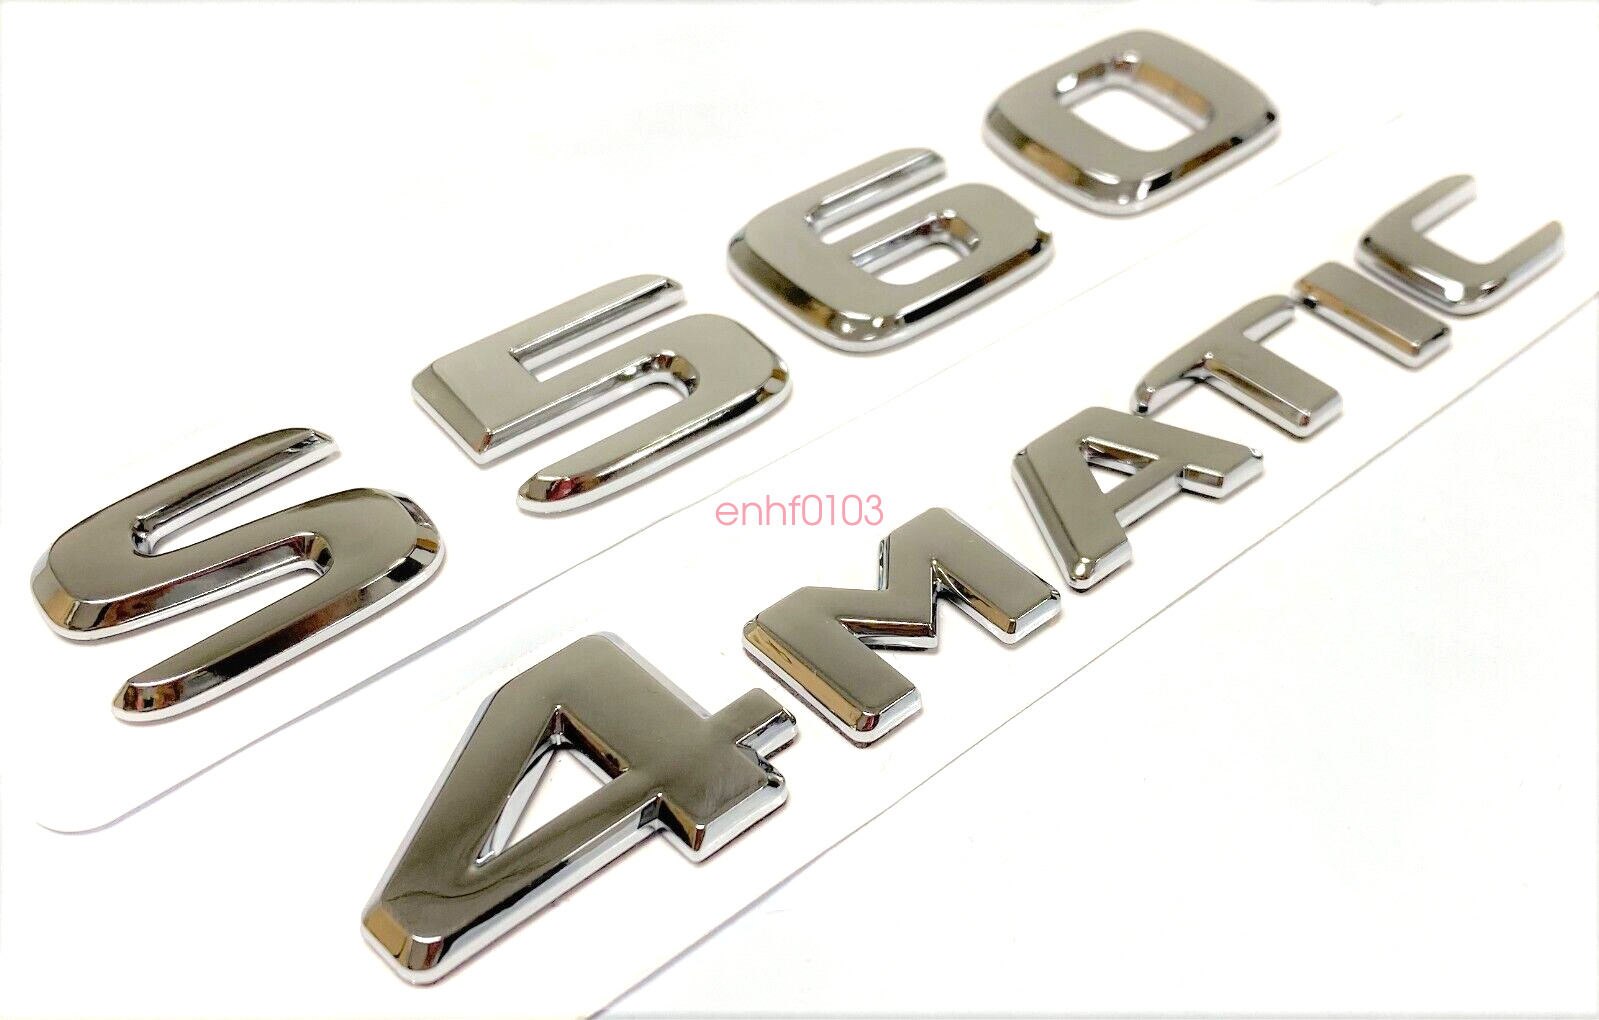 #2 S560 + 4MATIC CHROME MERCEDES REAR TRUNK EMBLEM BADGE NAMEPLATE DECAL NUMBER